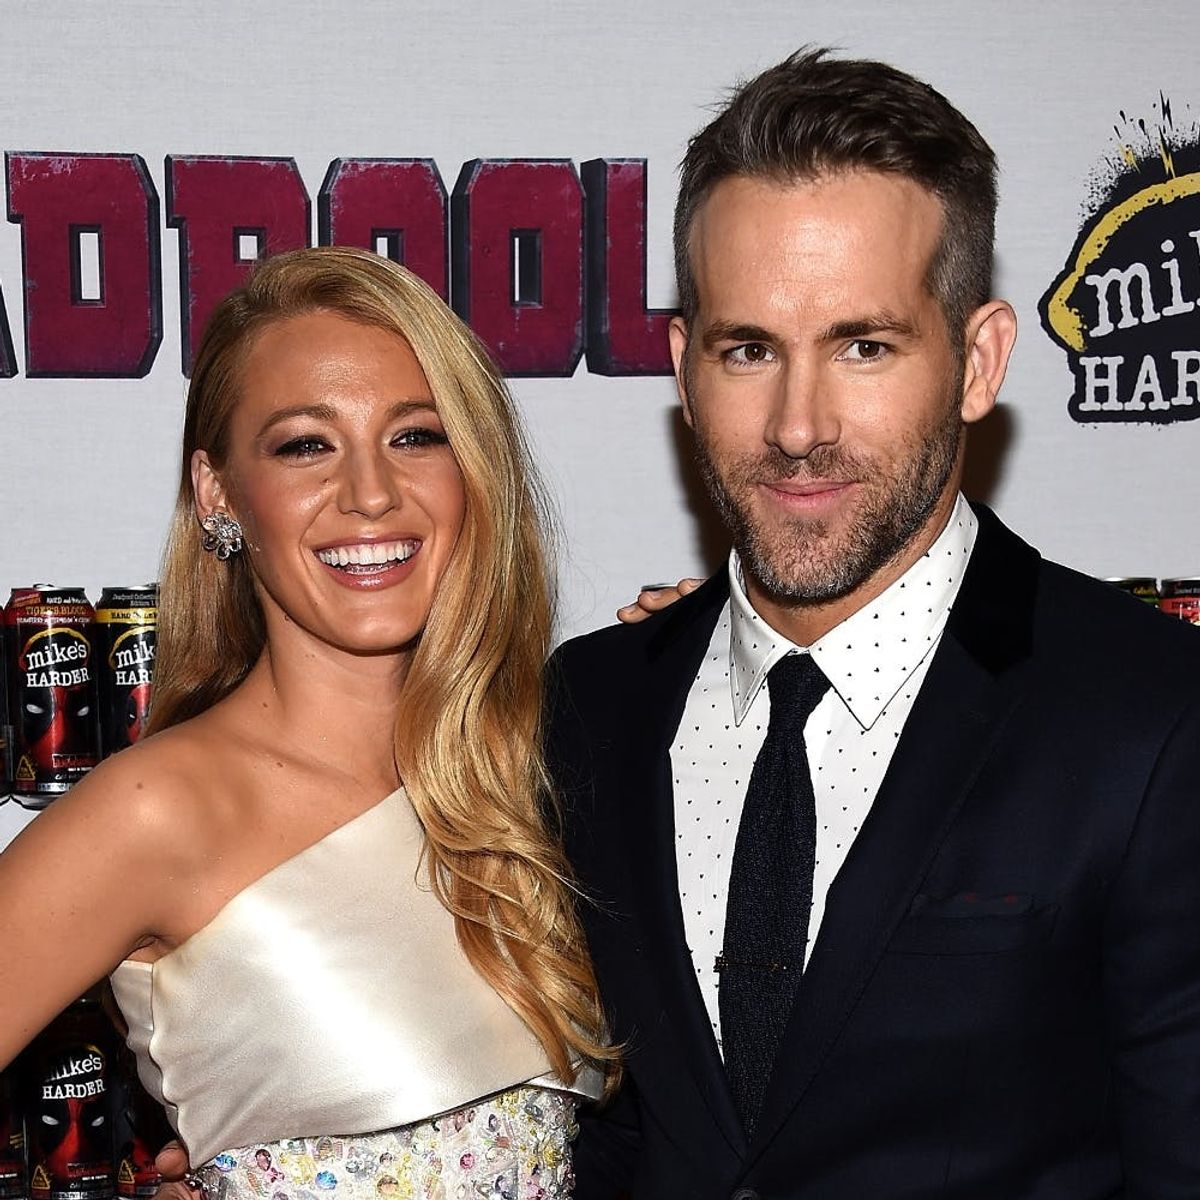 Blake Lively Just Revealed the Type of Uncommon Family She and Ryan Plan to Have